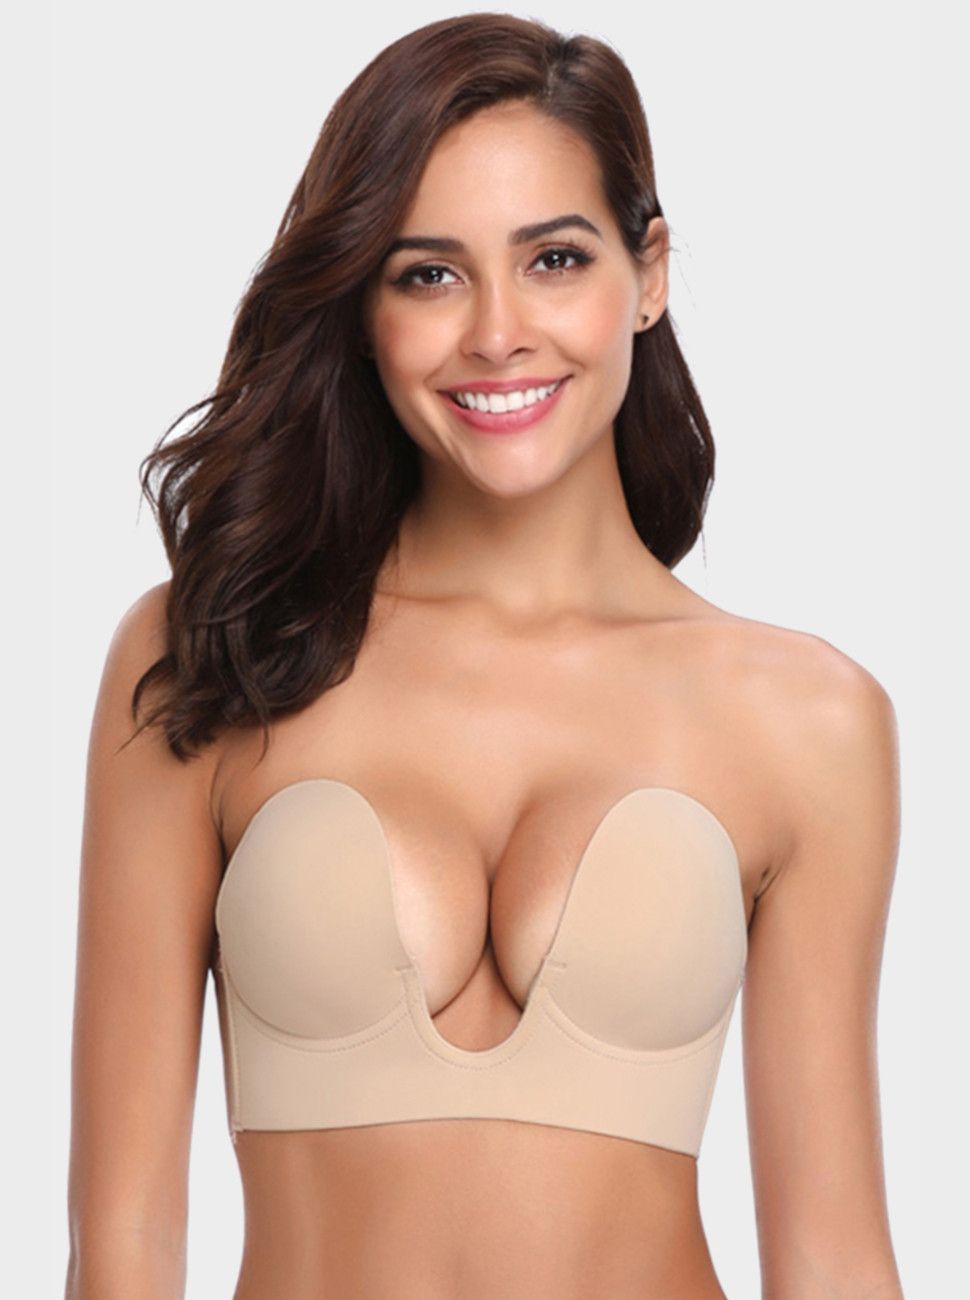 Buy Invisible silicone bra at Lowest Price in Pakistan